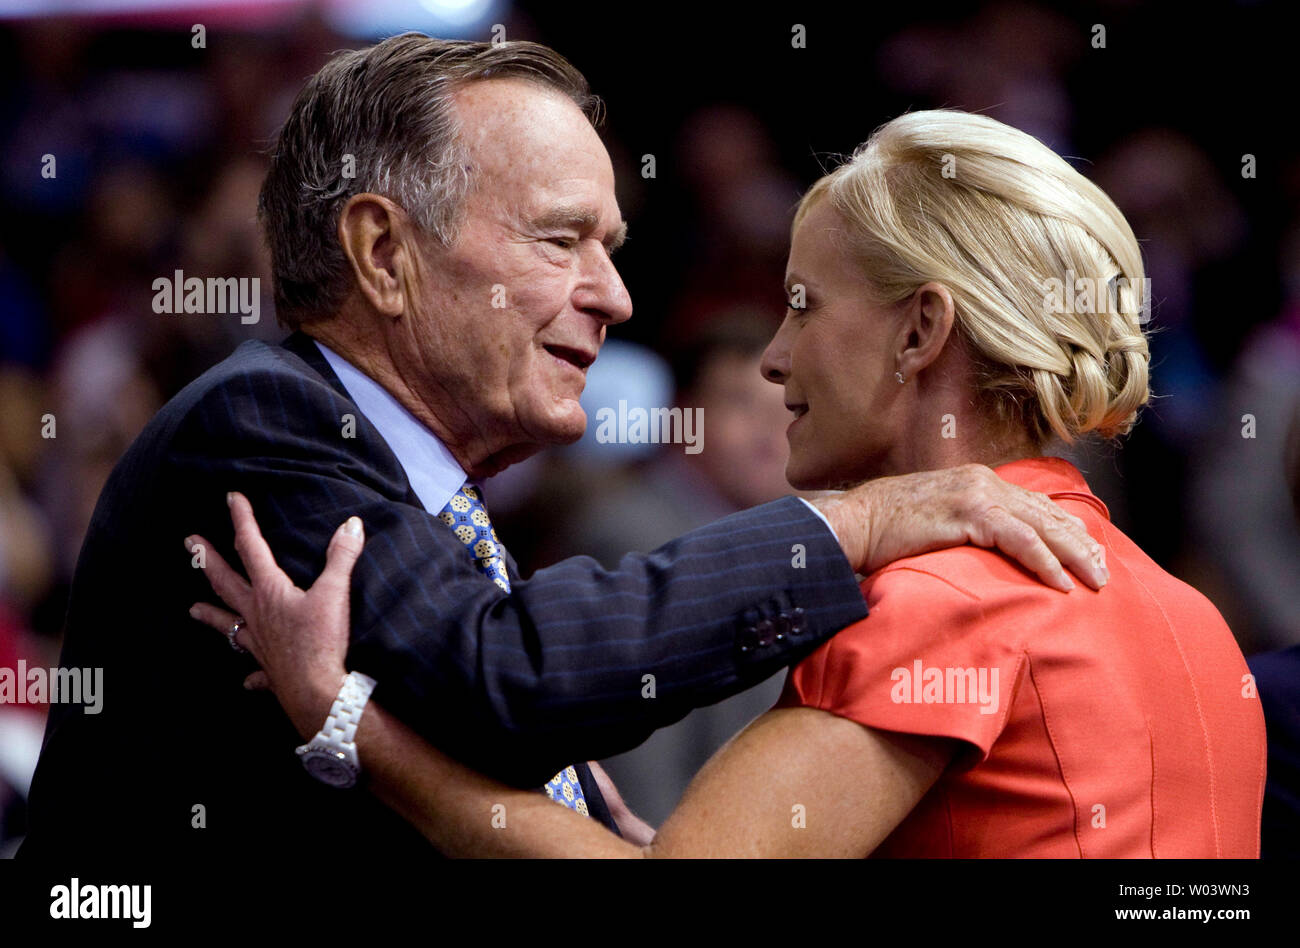 Former U.S. President George H. W. Bush greets Cindy McCain, wife of Republican presidential candidate John McCain, R-AZ, during the second day of the Republican National Convention at the Xcel Energy Center in St. Paul, Minnesota on September 2, 2008. (UPI Photo/Patrick D. McDermott) Stock Photo